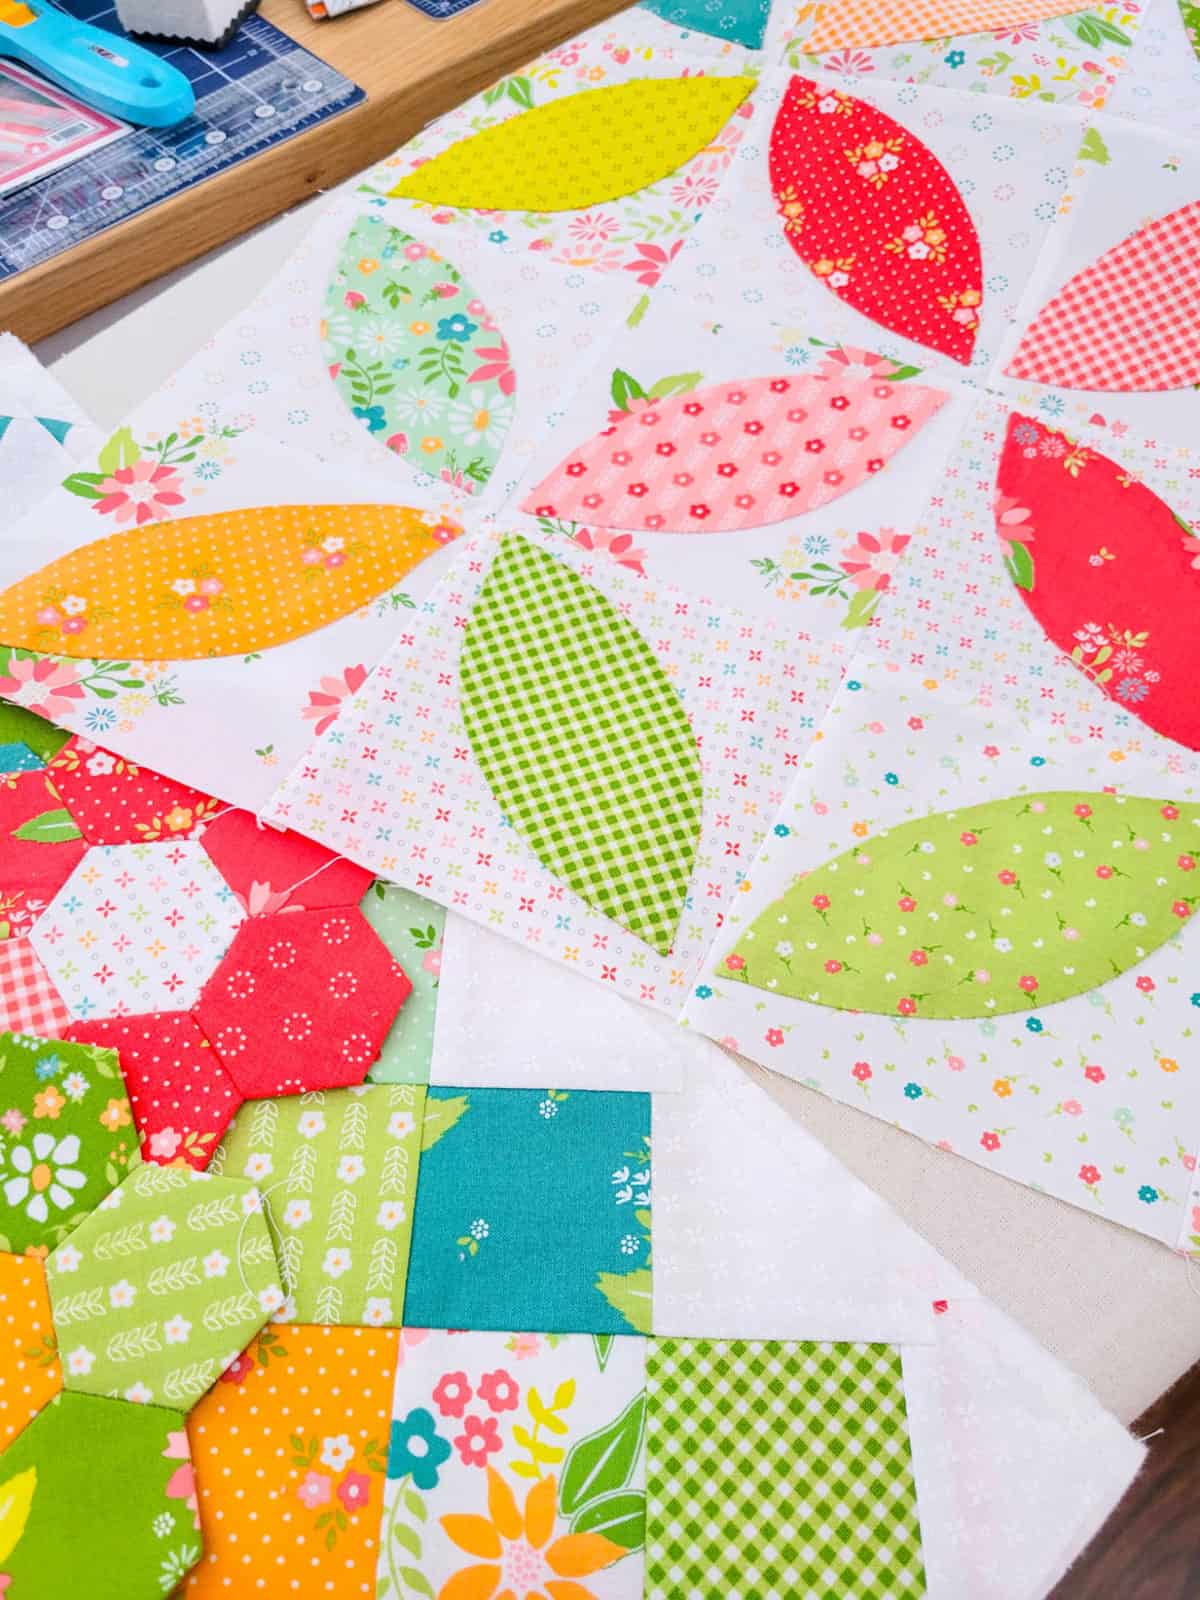 Quilts in Progress: Thoughts on the Process + Tips featured by Top US Quilt Blog, A Quilting Life